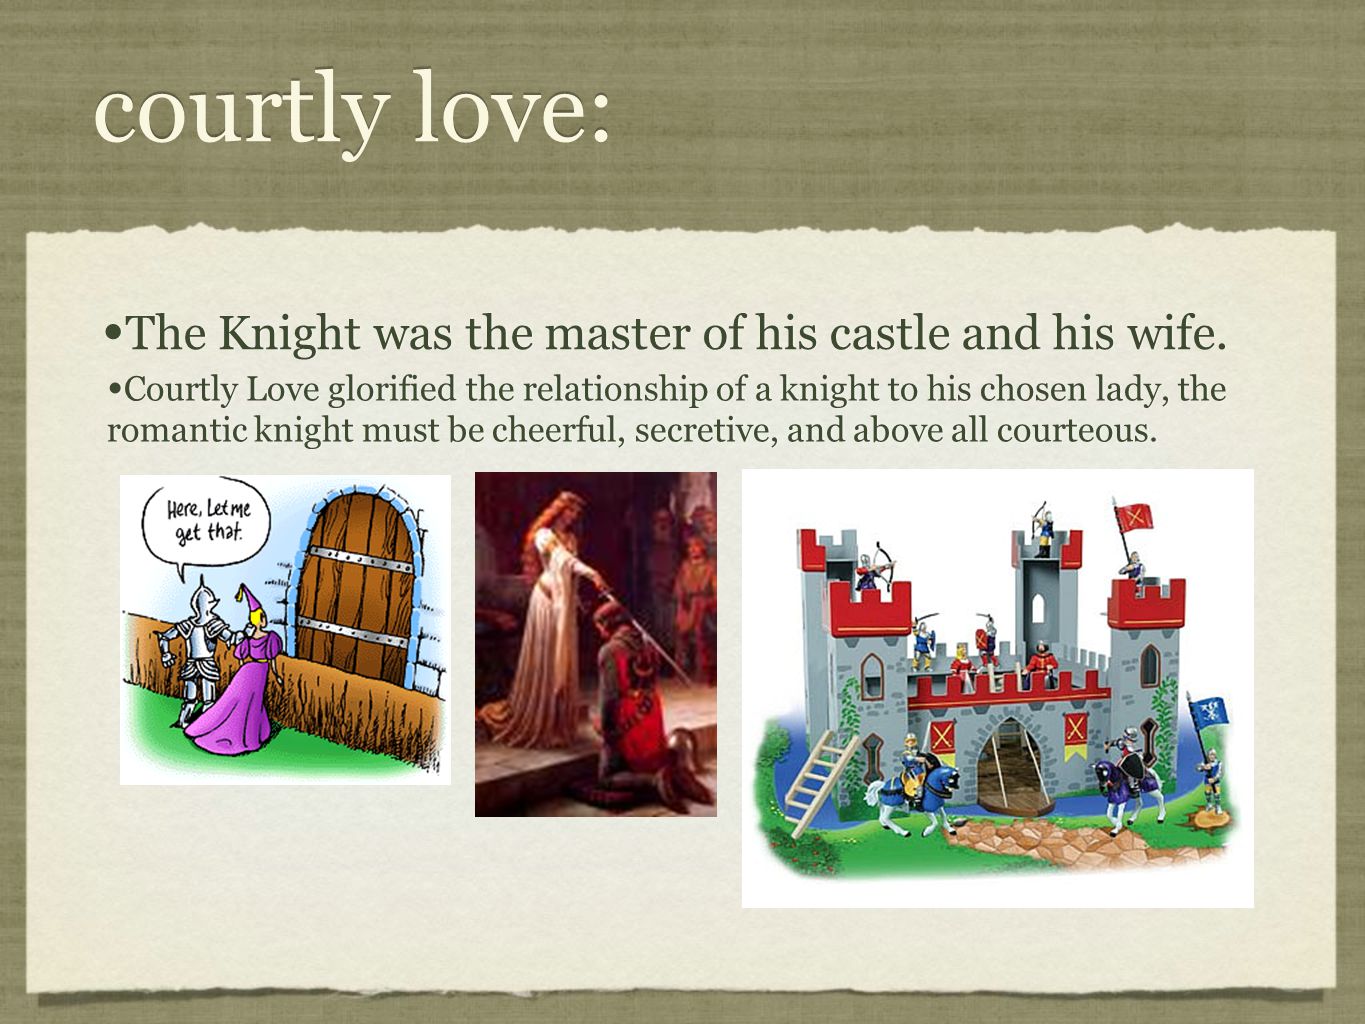 courtly love: The Knight was the master of his castle and his wife.